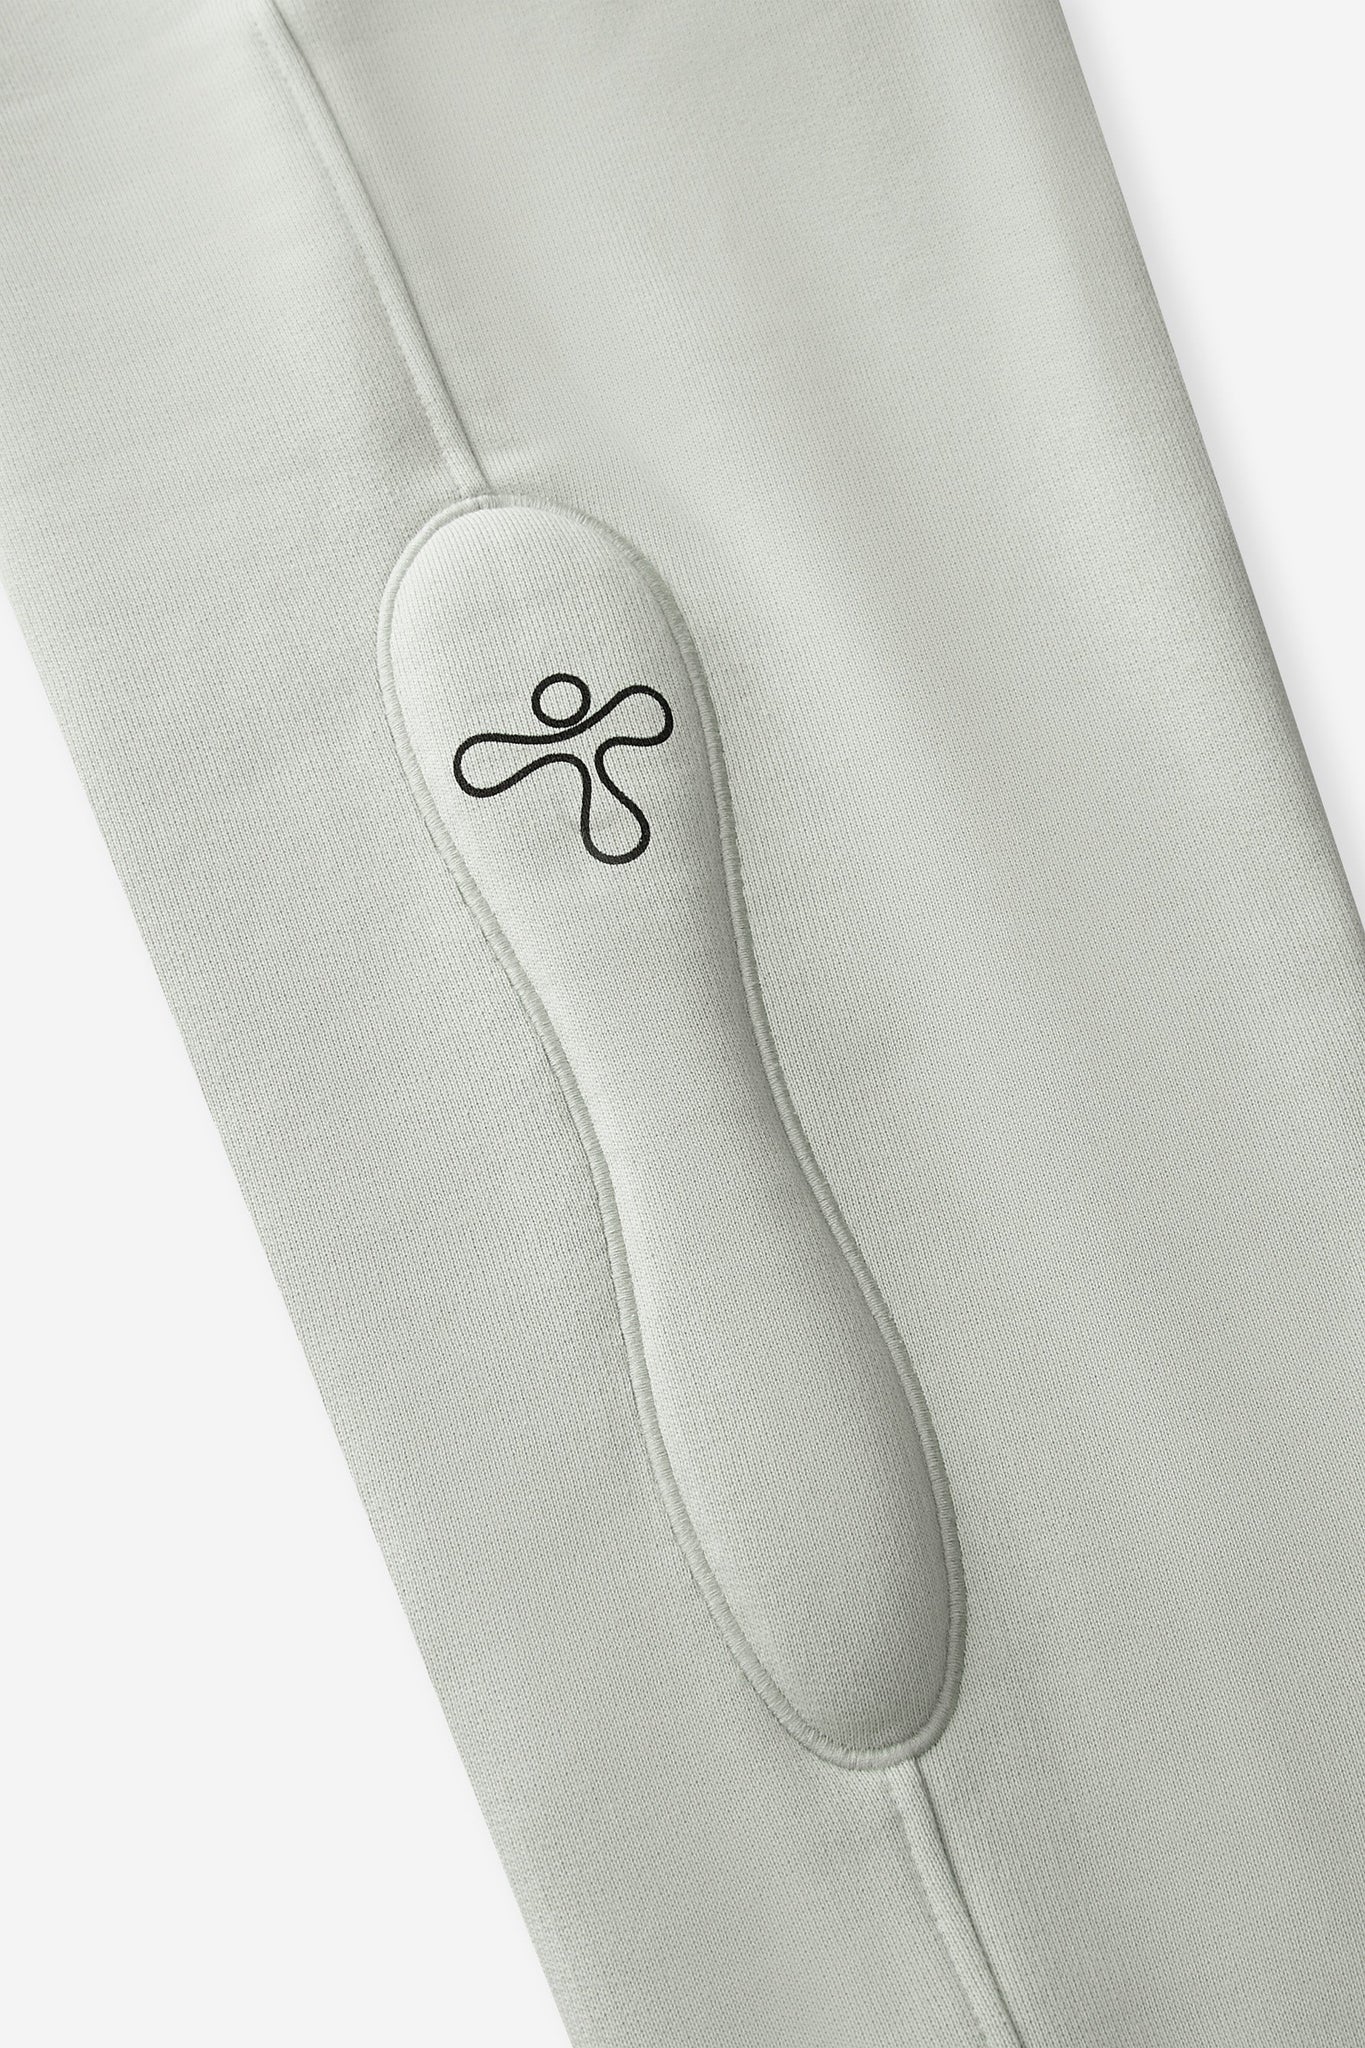 alt="detail of light green jogger pants with padded embroidered detail and print"